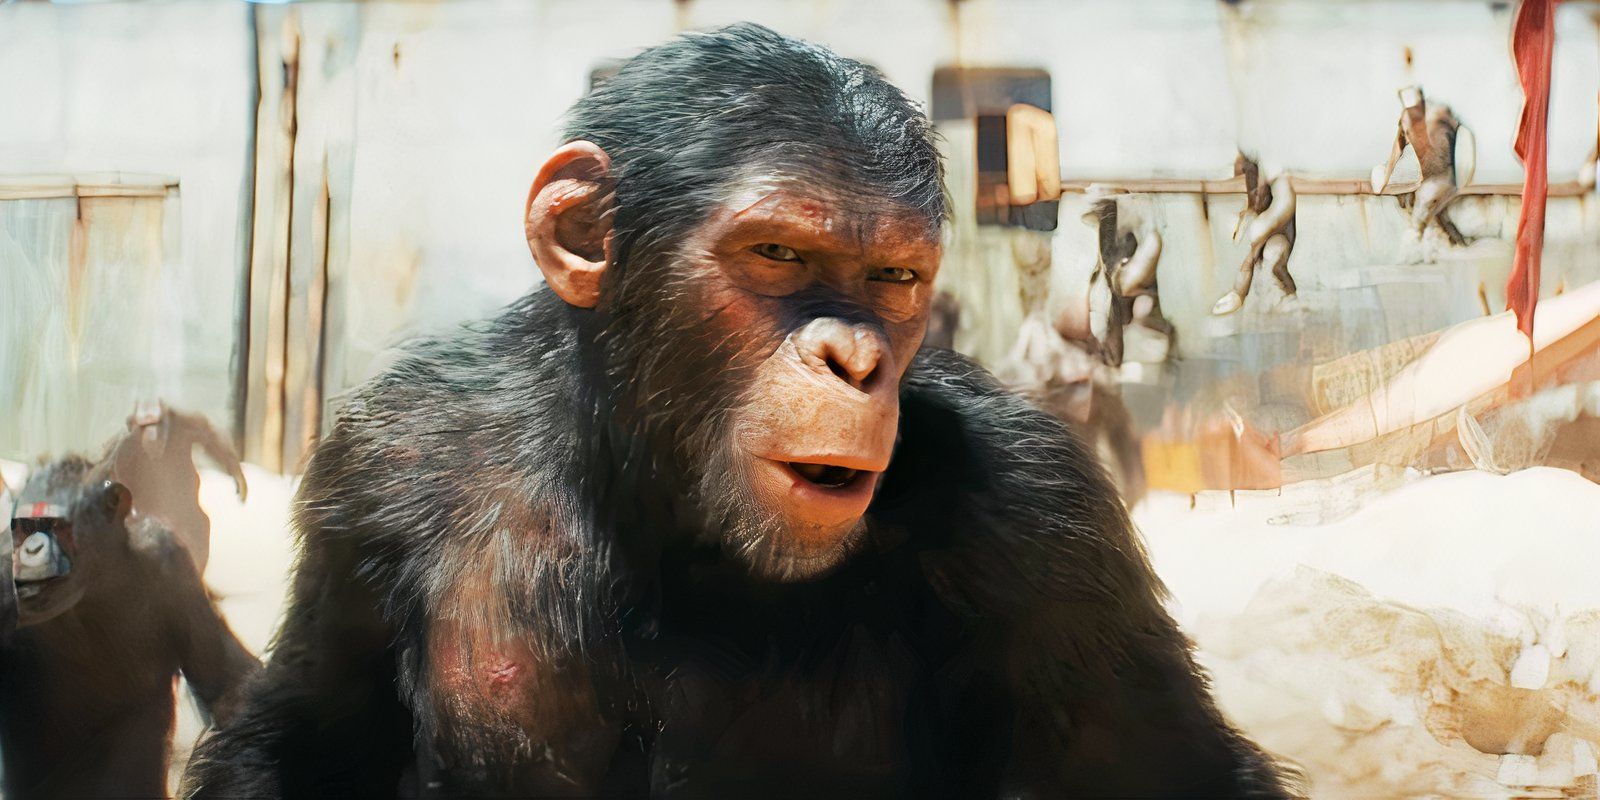 Noa in Kingdom of the Planet of the Apes